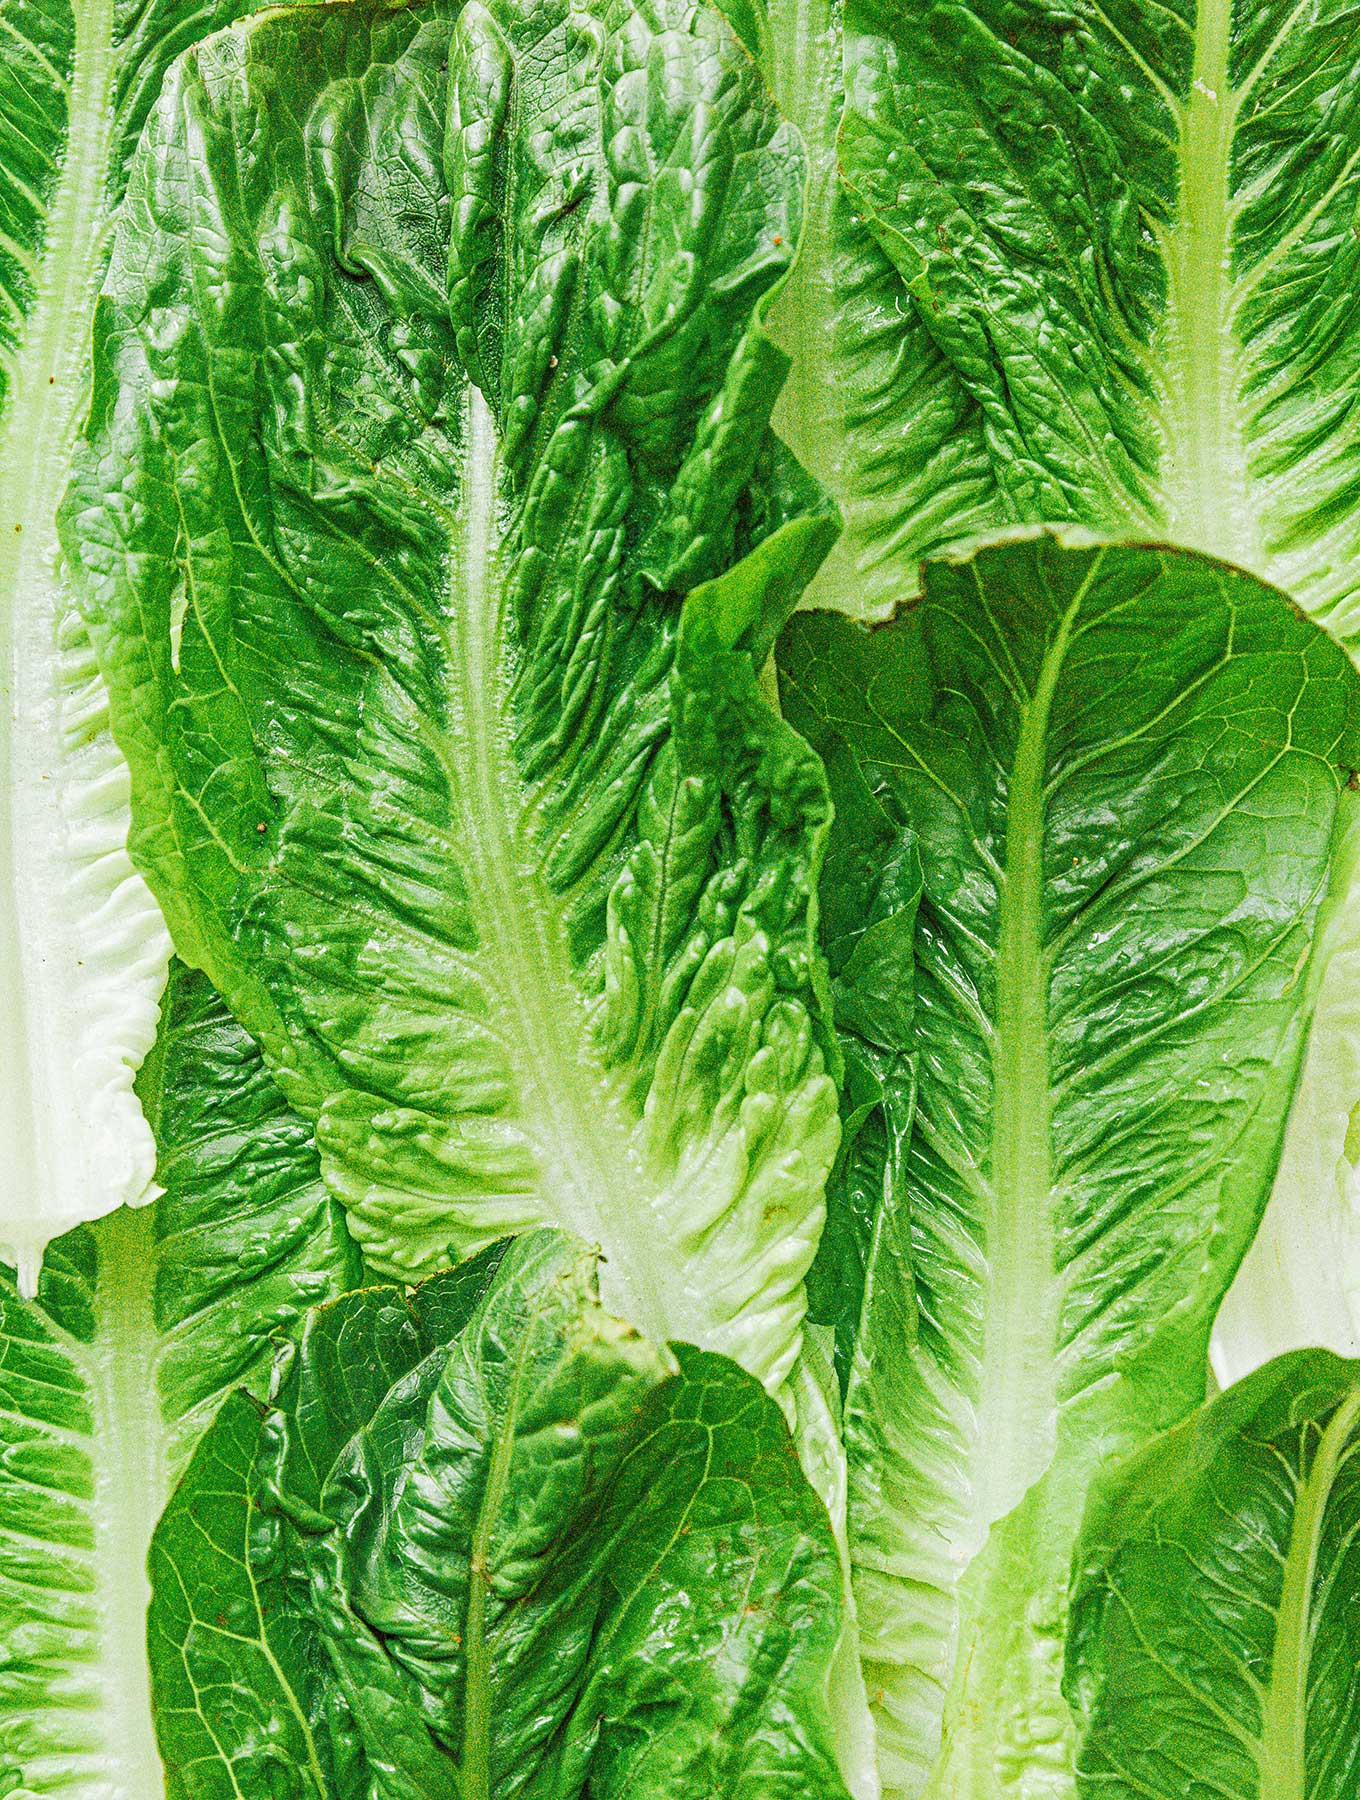 Romaine Lettuce 101: Everything You Need to Know! | Live Eat Learn